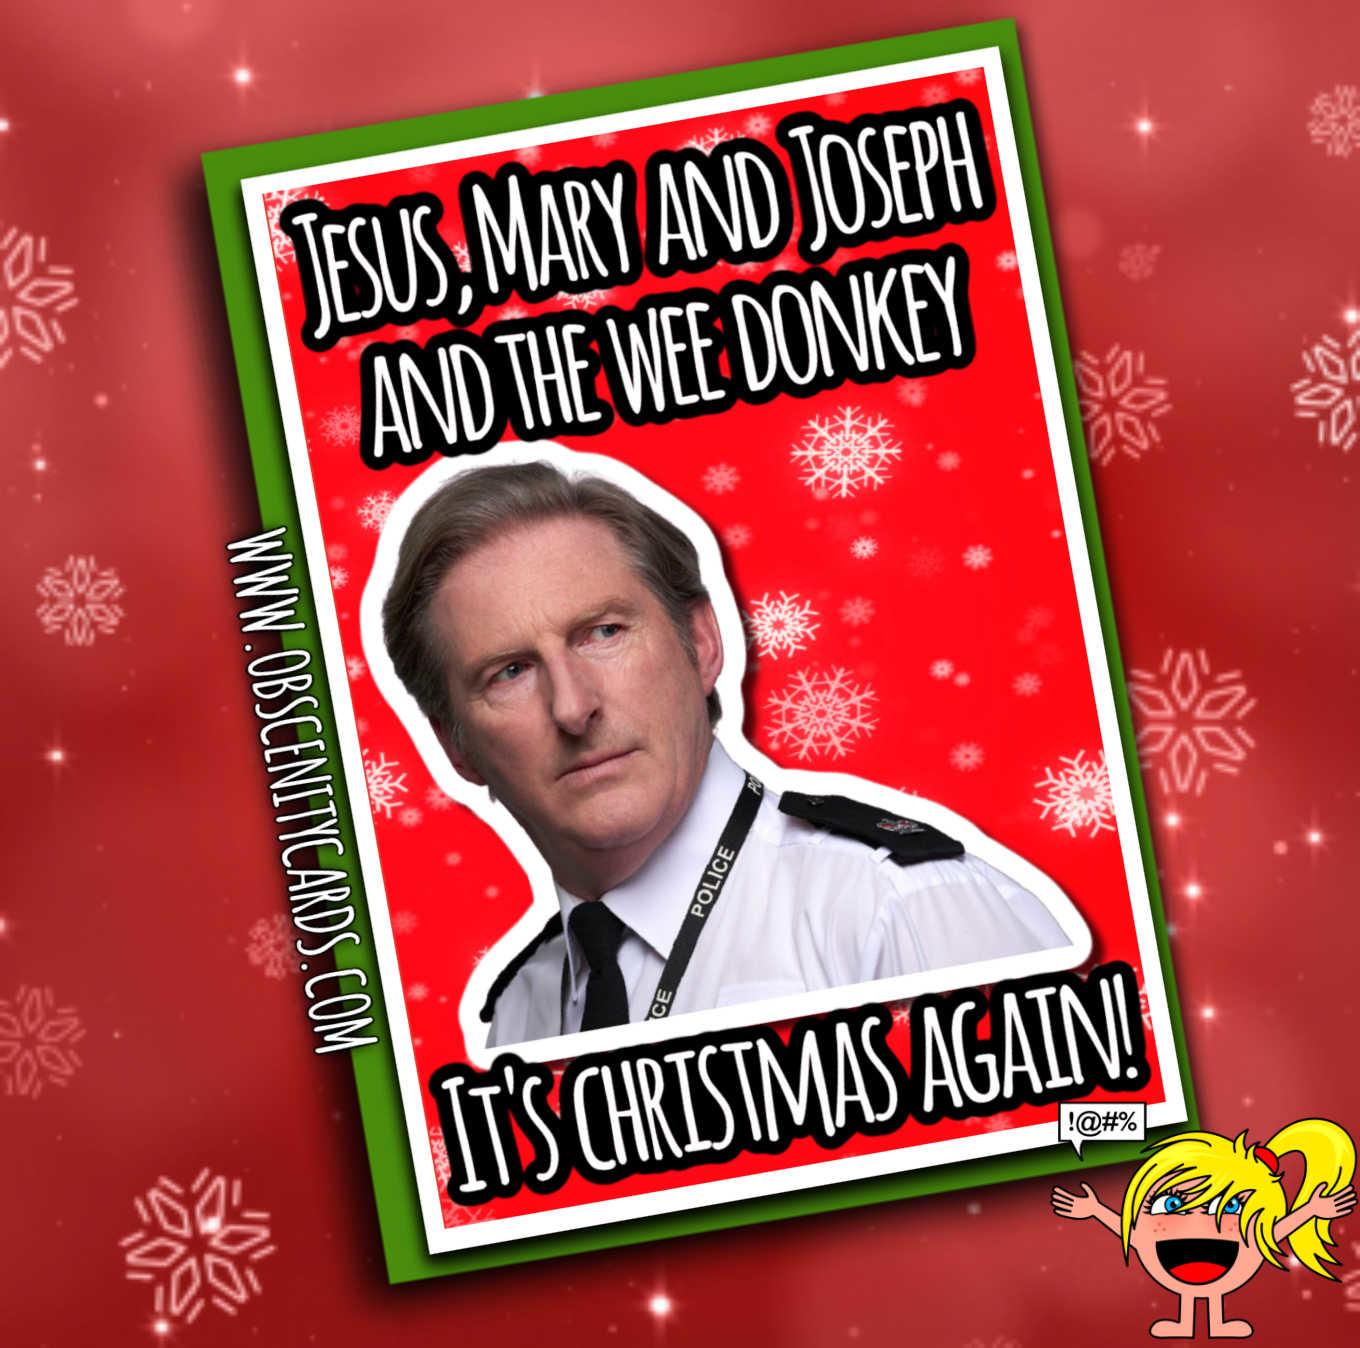 Jesus, Mary and Joseph and the wee donkey It's Christmas Again! Line Of Duty Christmas Card